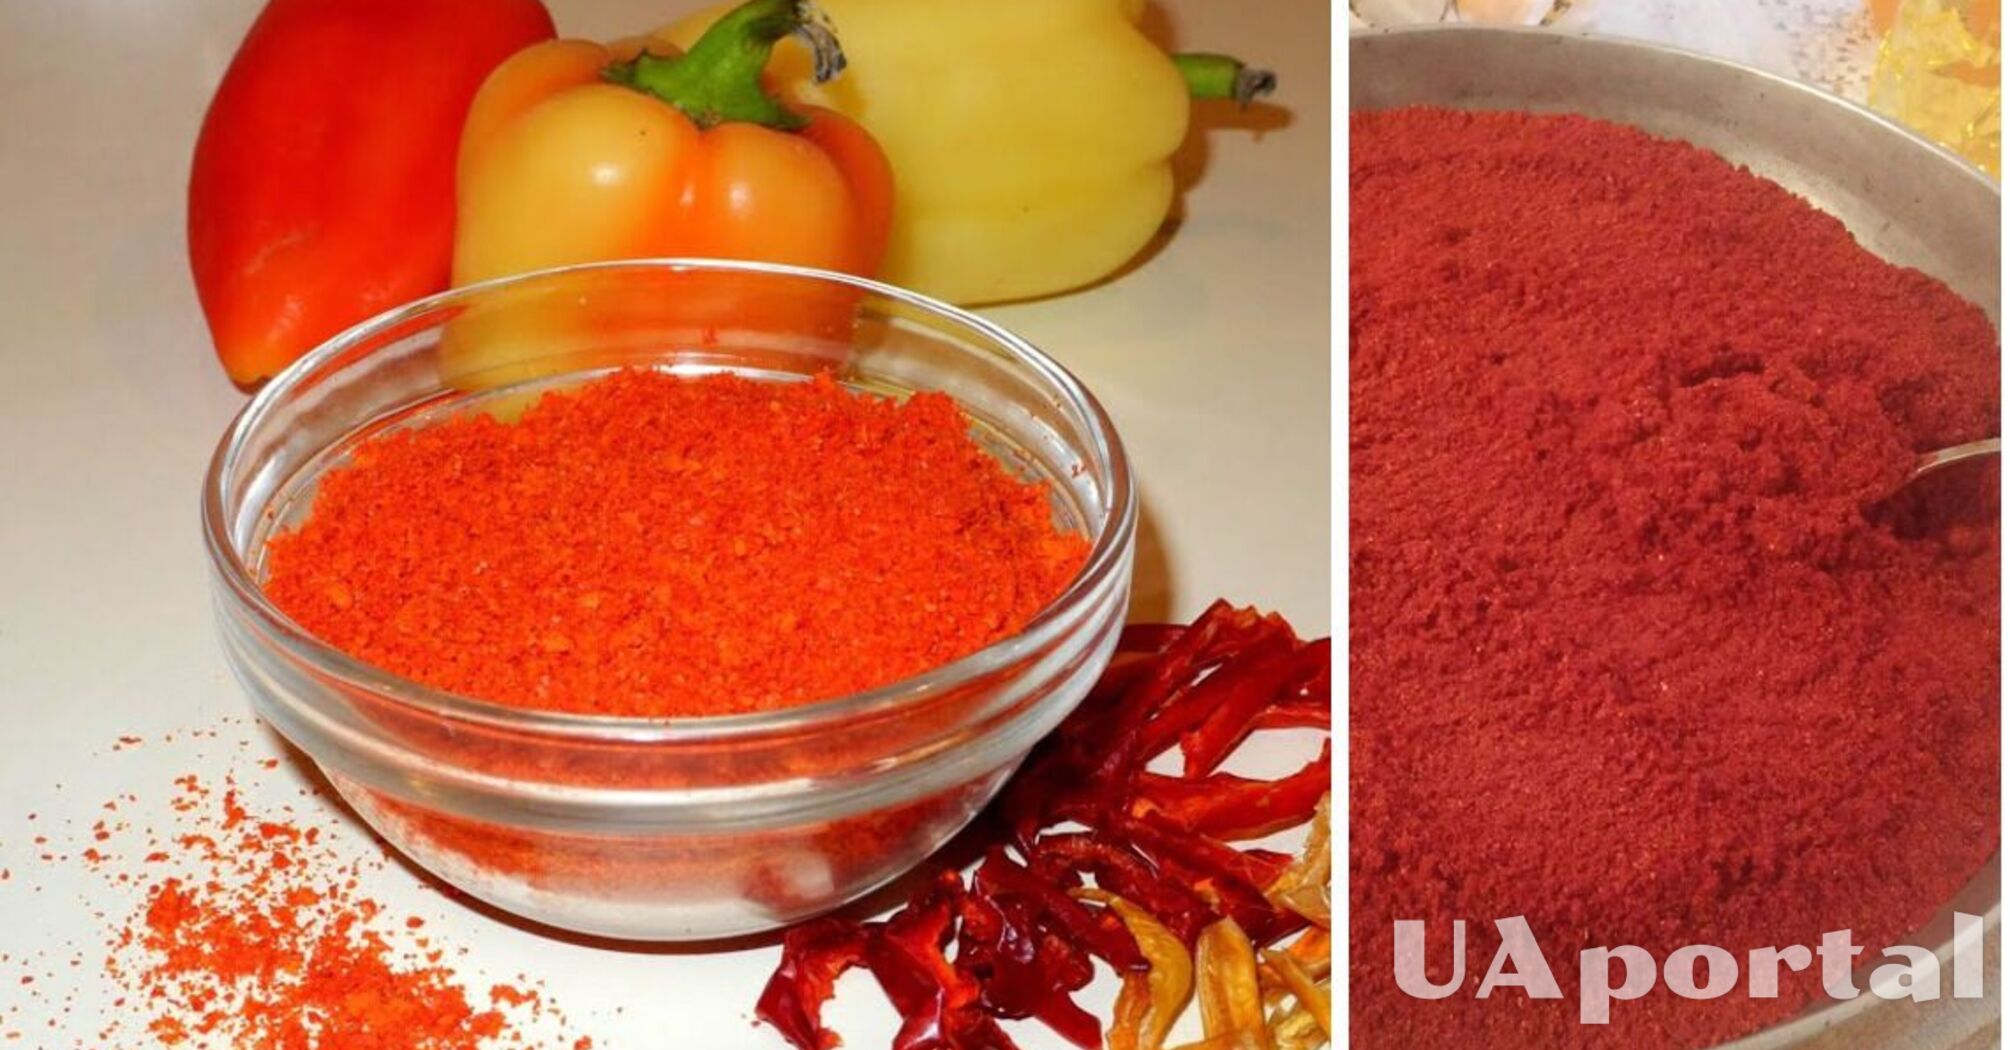 How to make your own pepper paprika at home